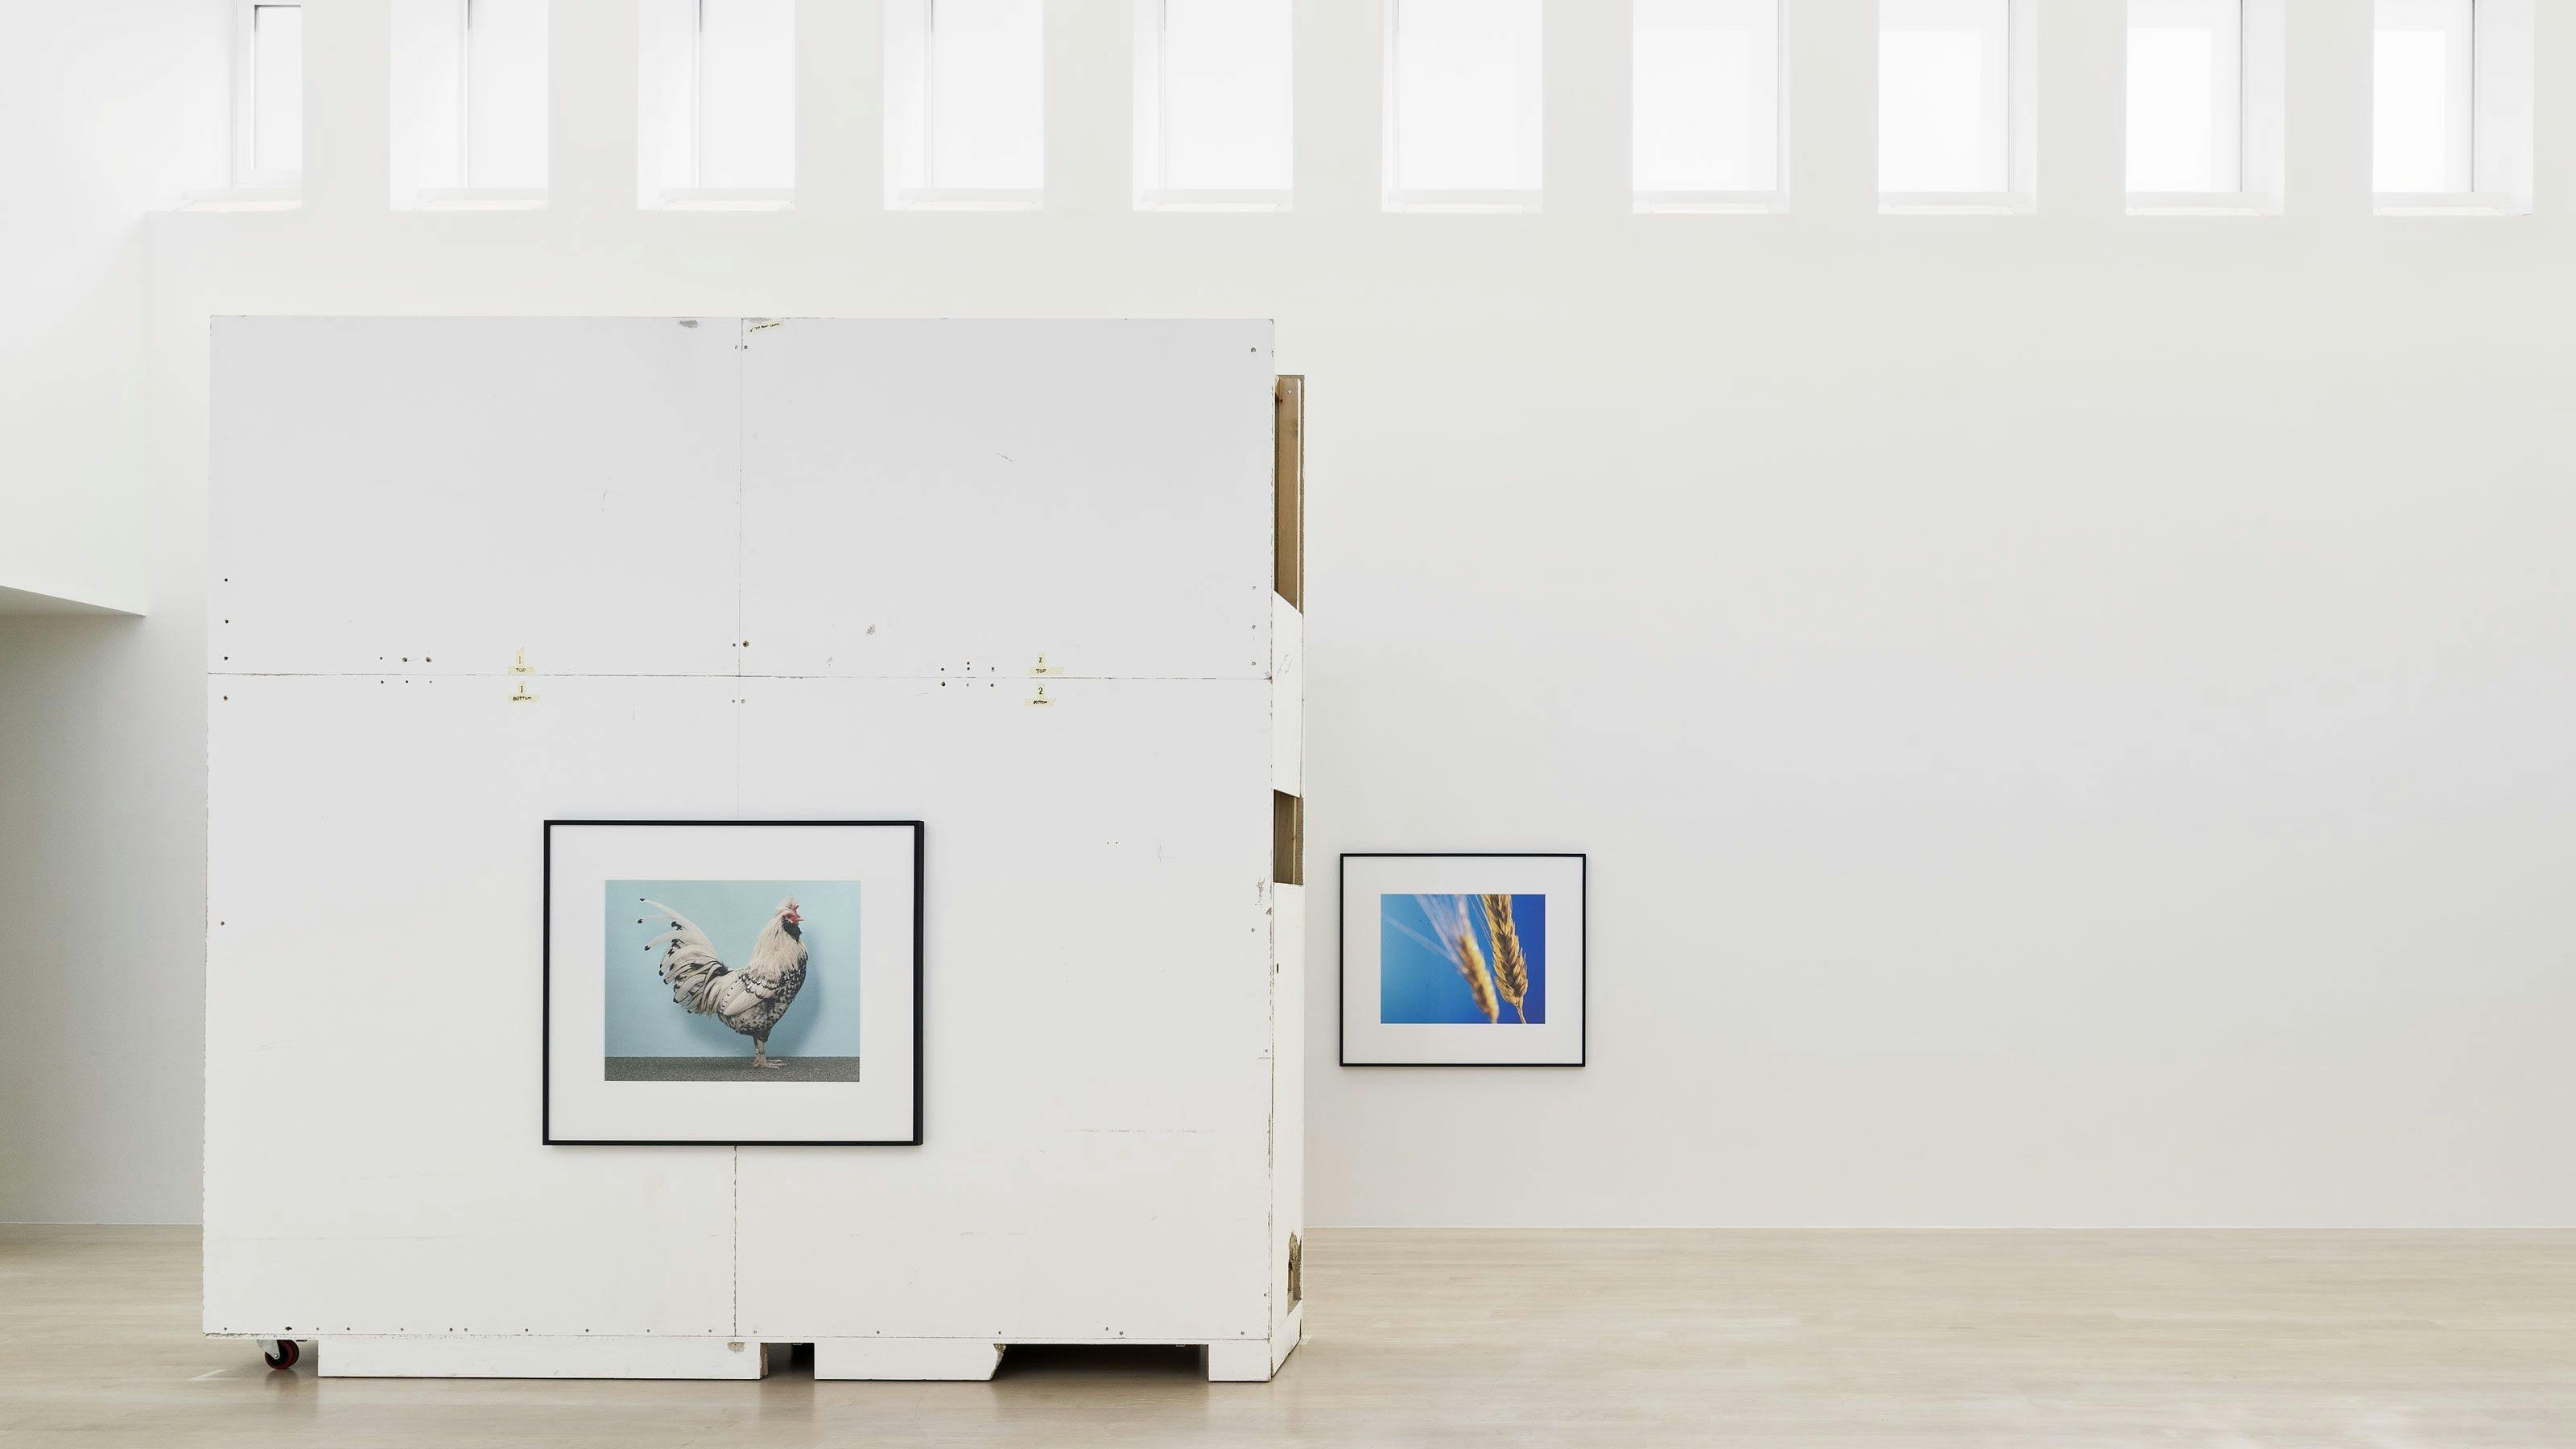 Installation view of the exhibition Christopher Williams: Normative Models at kestnergesellschaft in Hanover, dated 2018. 